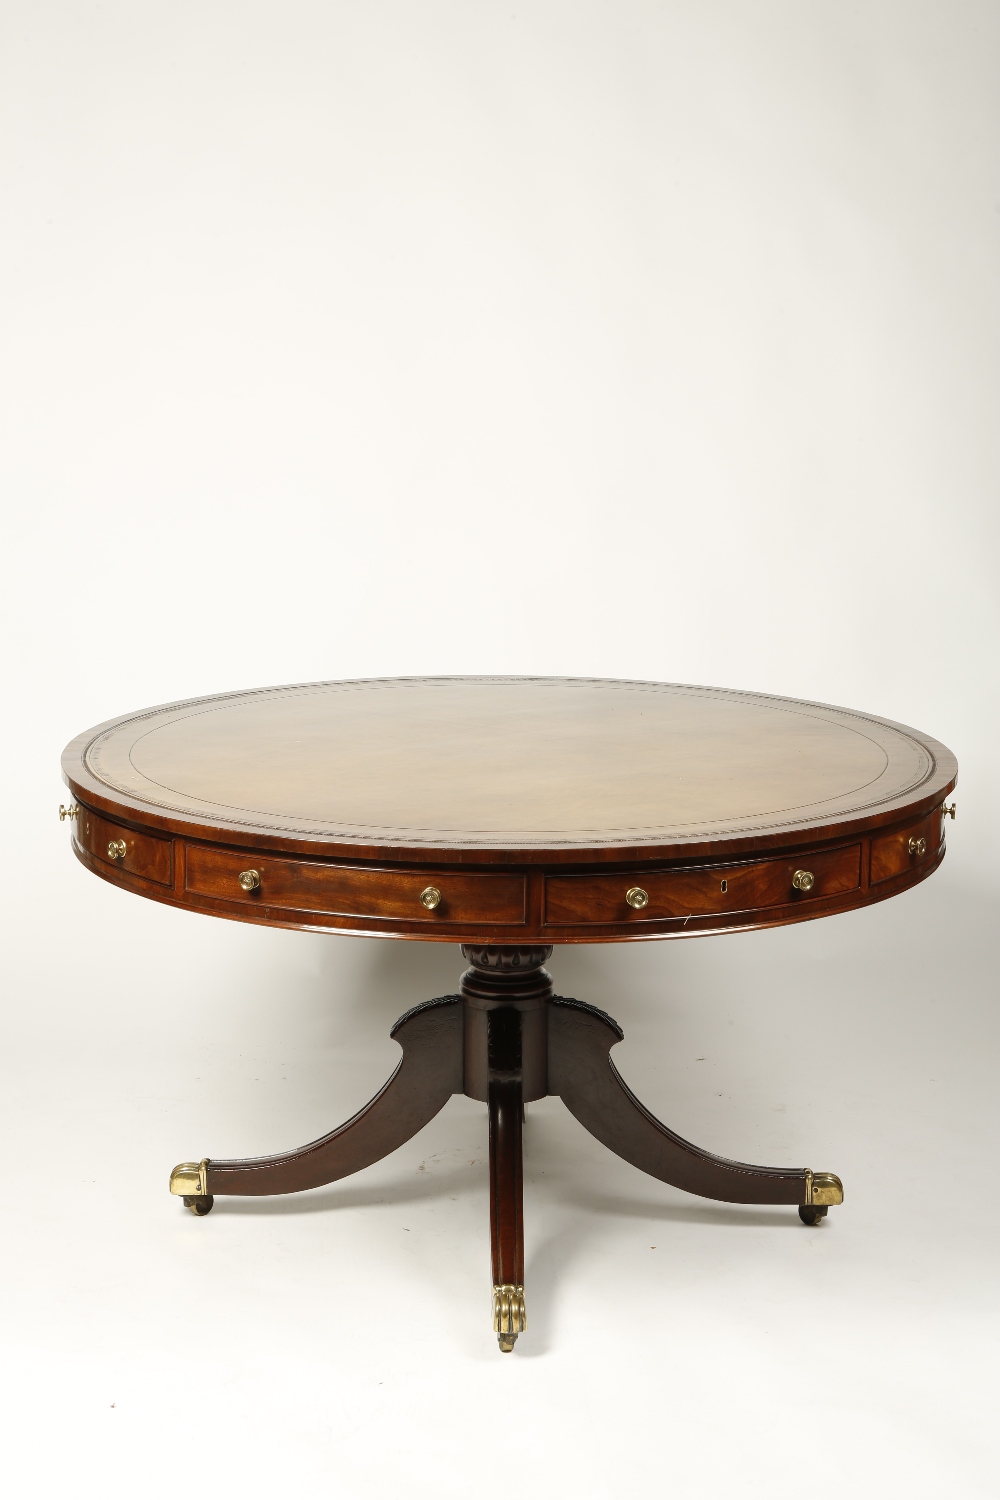 A LATE REGENCY MAHOGANY DRUM-TOP LIBRARY TABLE, the circular top with leather-lined writing